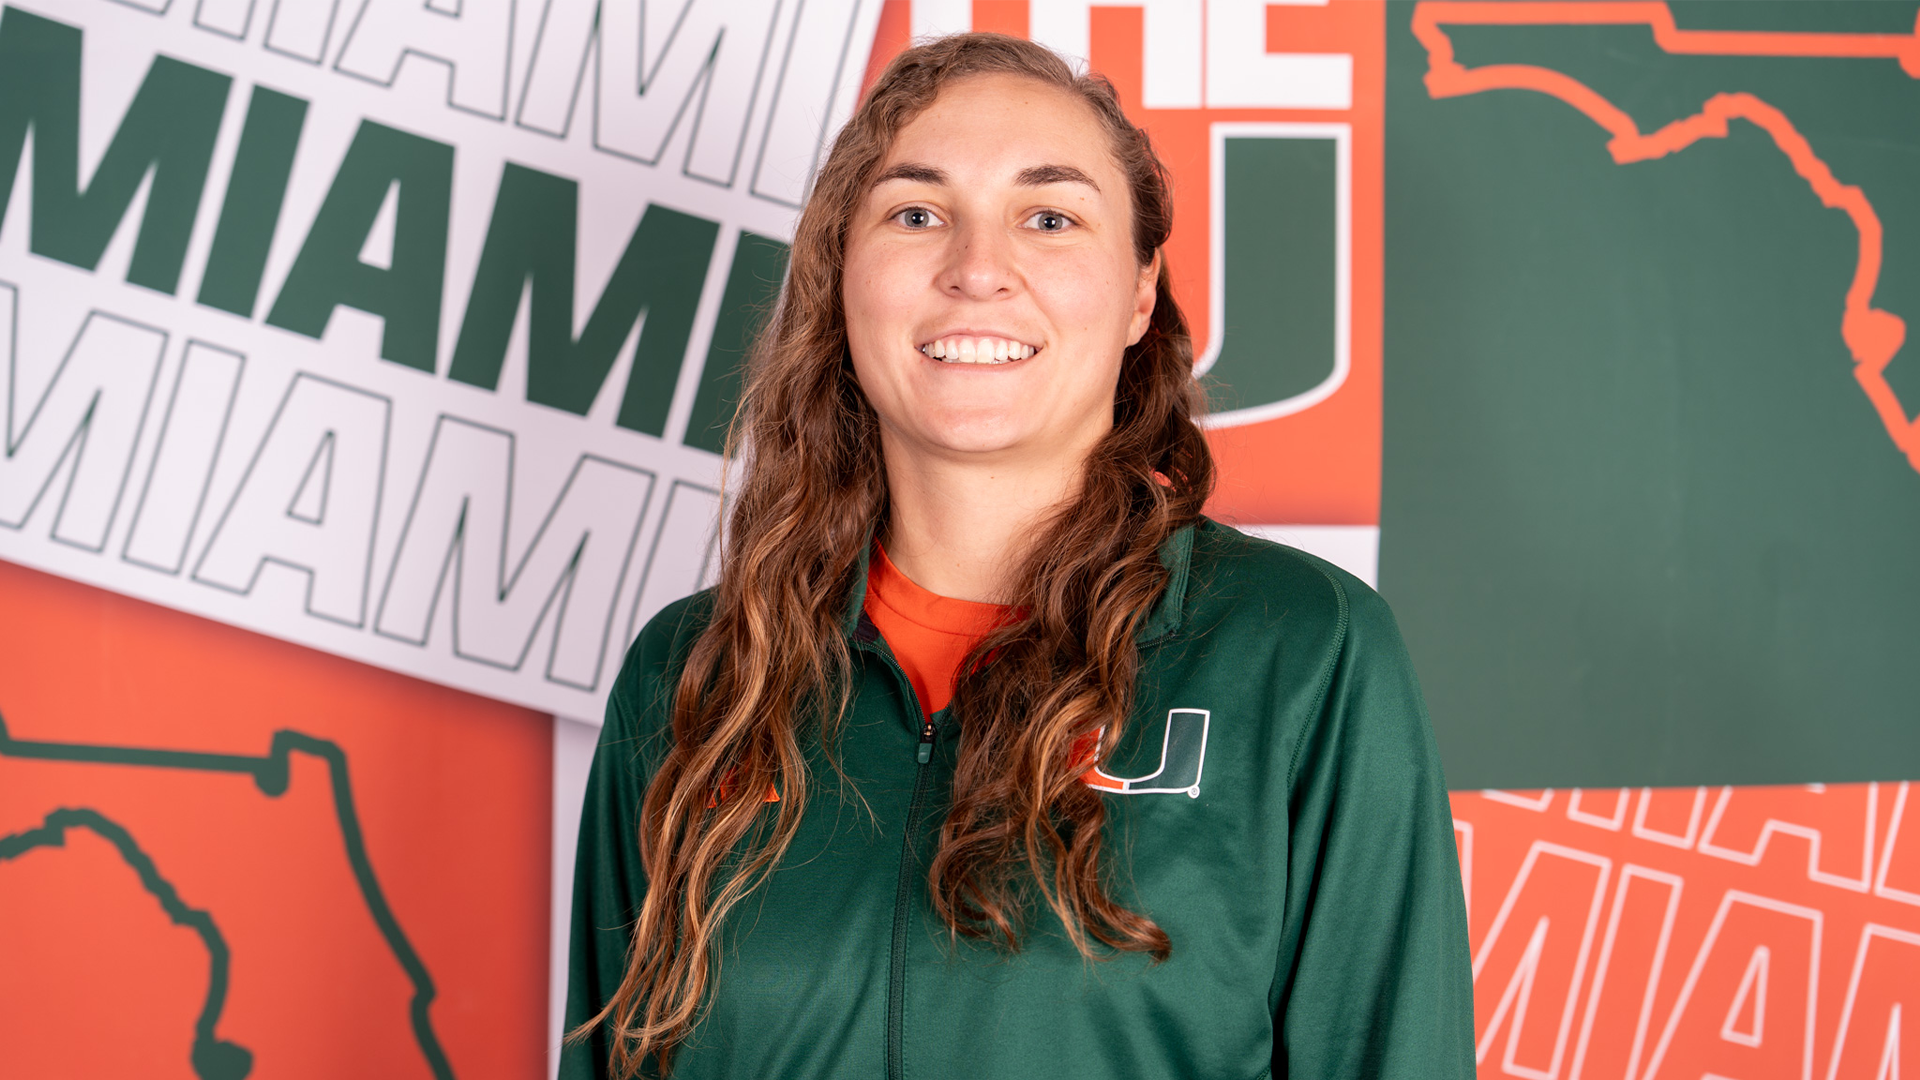 Miami Soccer Welcomes Assistant Coach Brooke Bradley